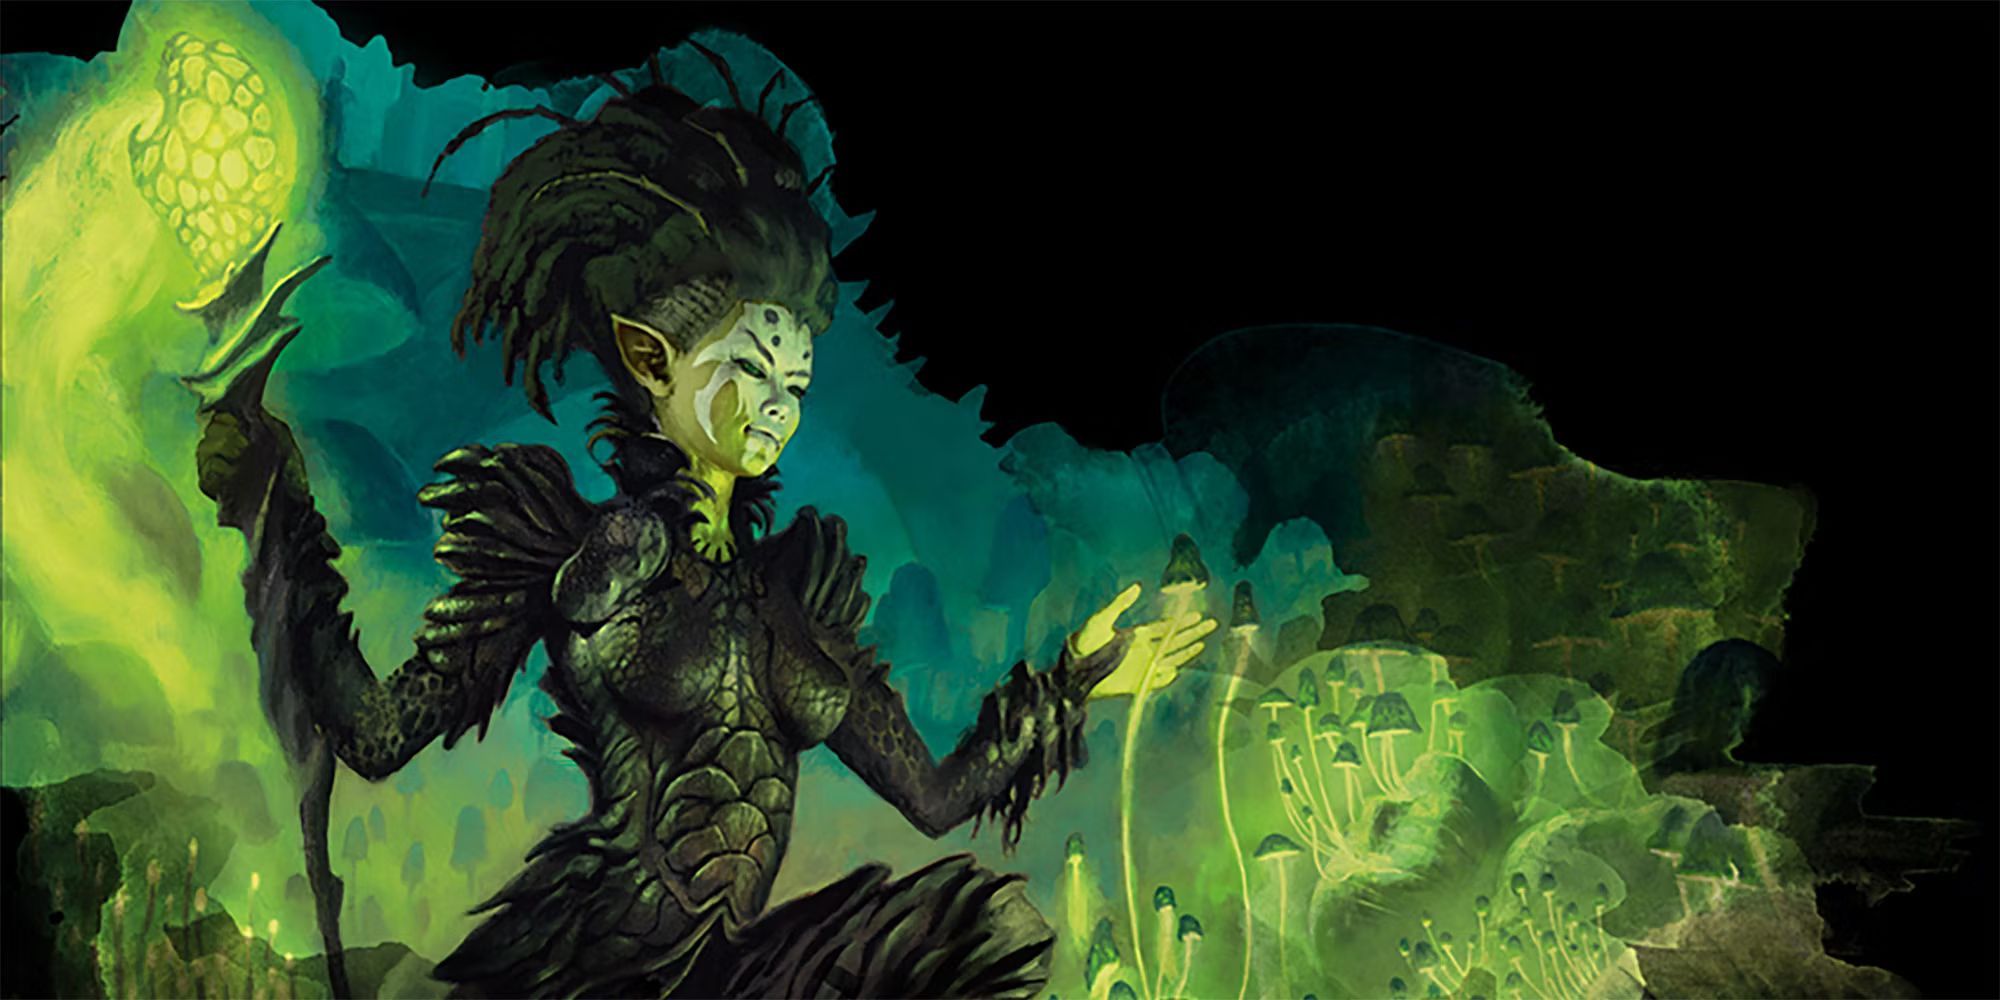 A spore druid cultivating luminescent fungi in the underdark, Dungeons & Dragons